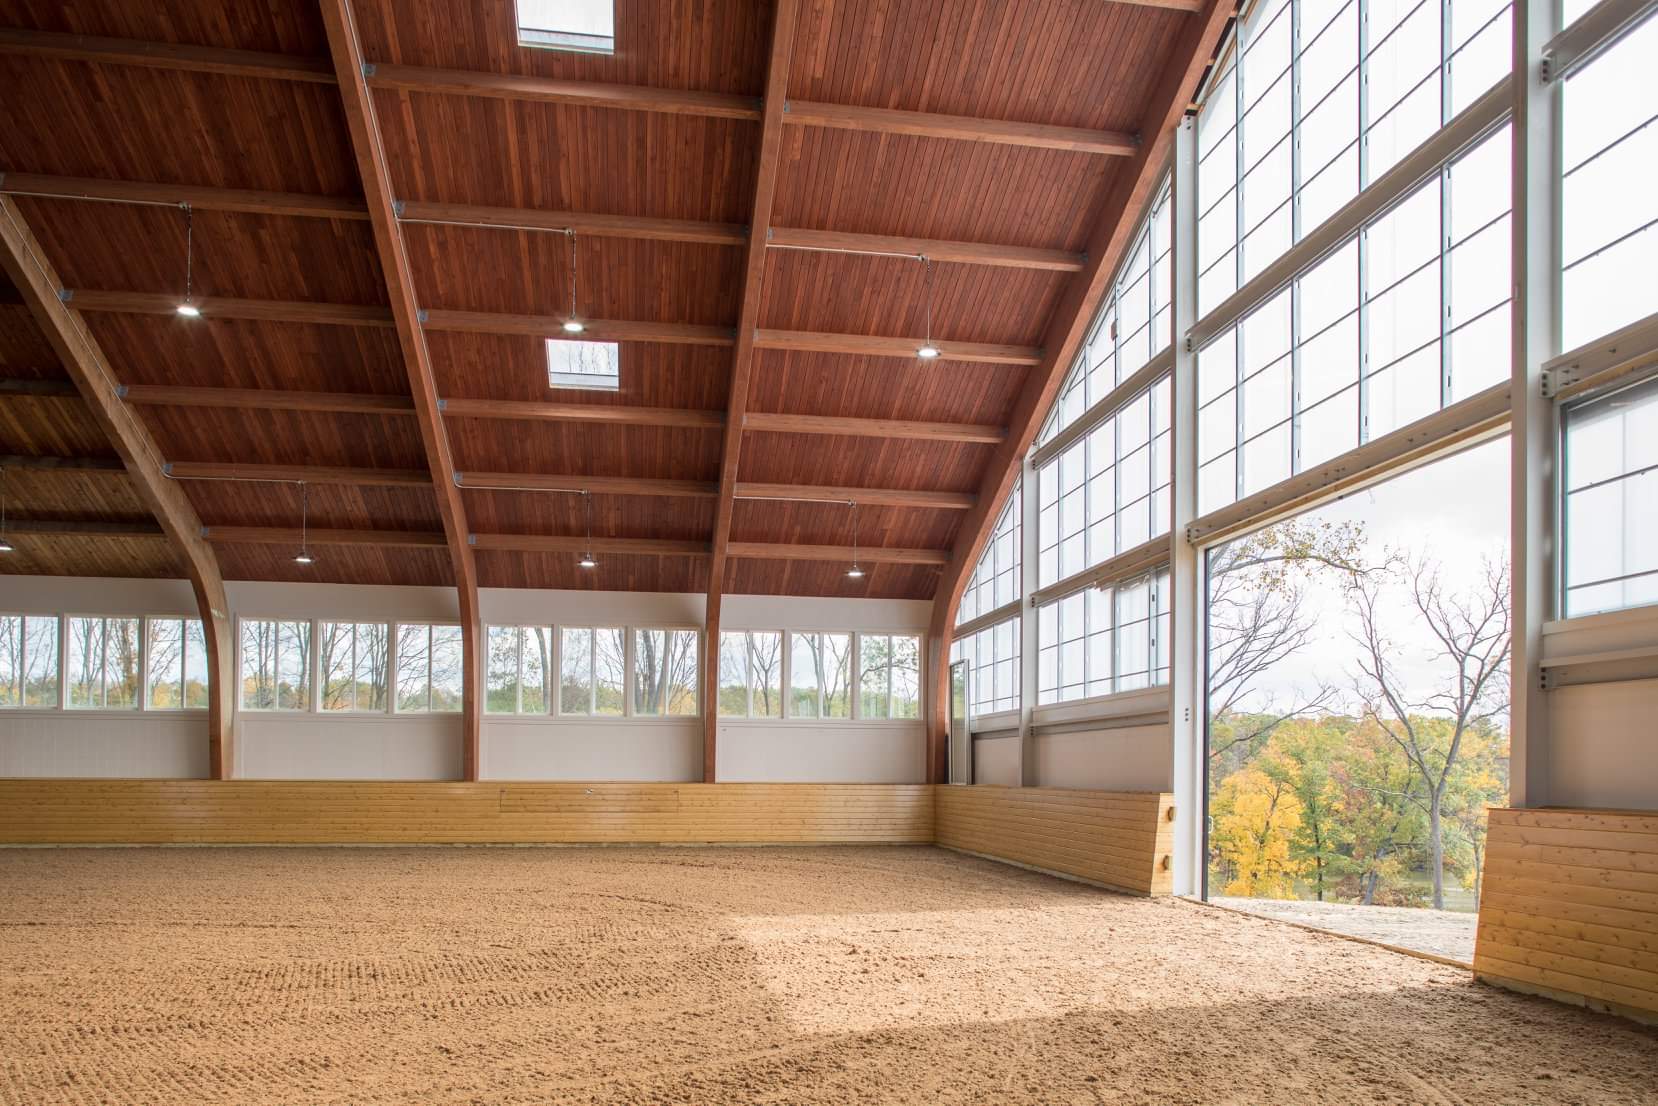 A large barn with a wooden floor and large windows.